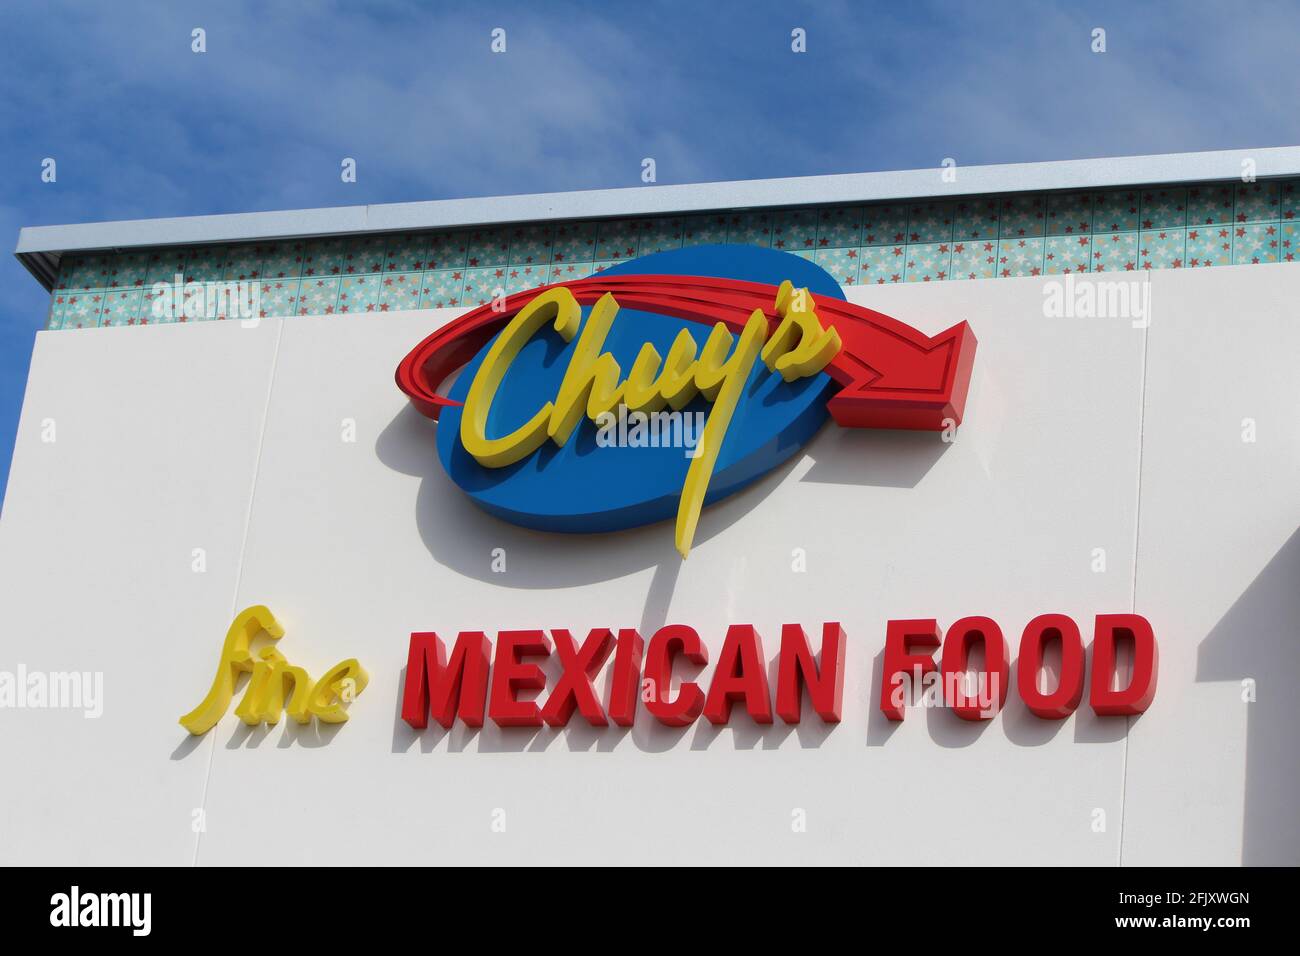 Chuy's is a Tex-Mex restaurant chain established in 1982 in Austin, Texas by Mike Young and John Zapp.  Chuy's serves authentic Tex-Mex food. Close up Stock Photo